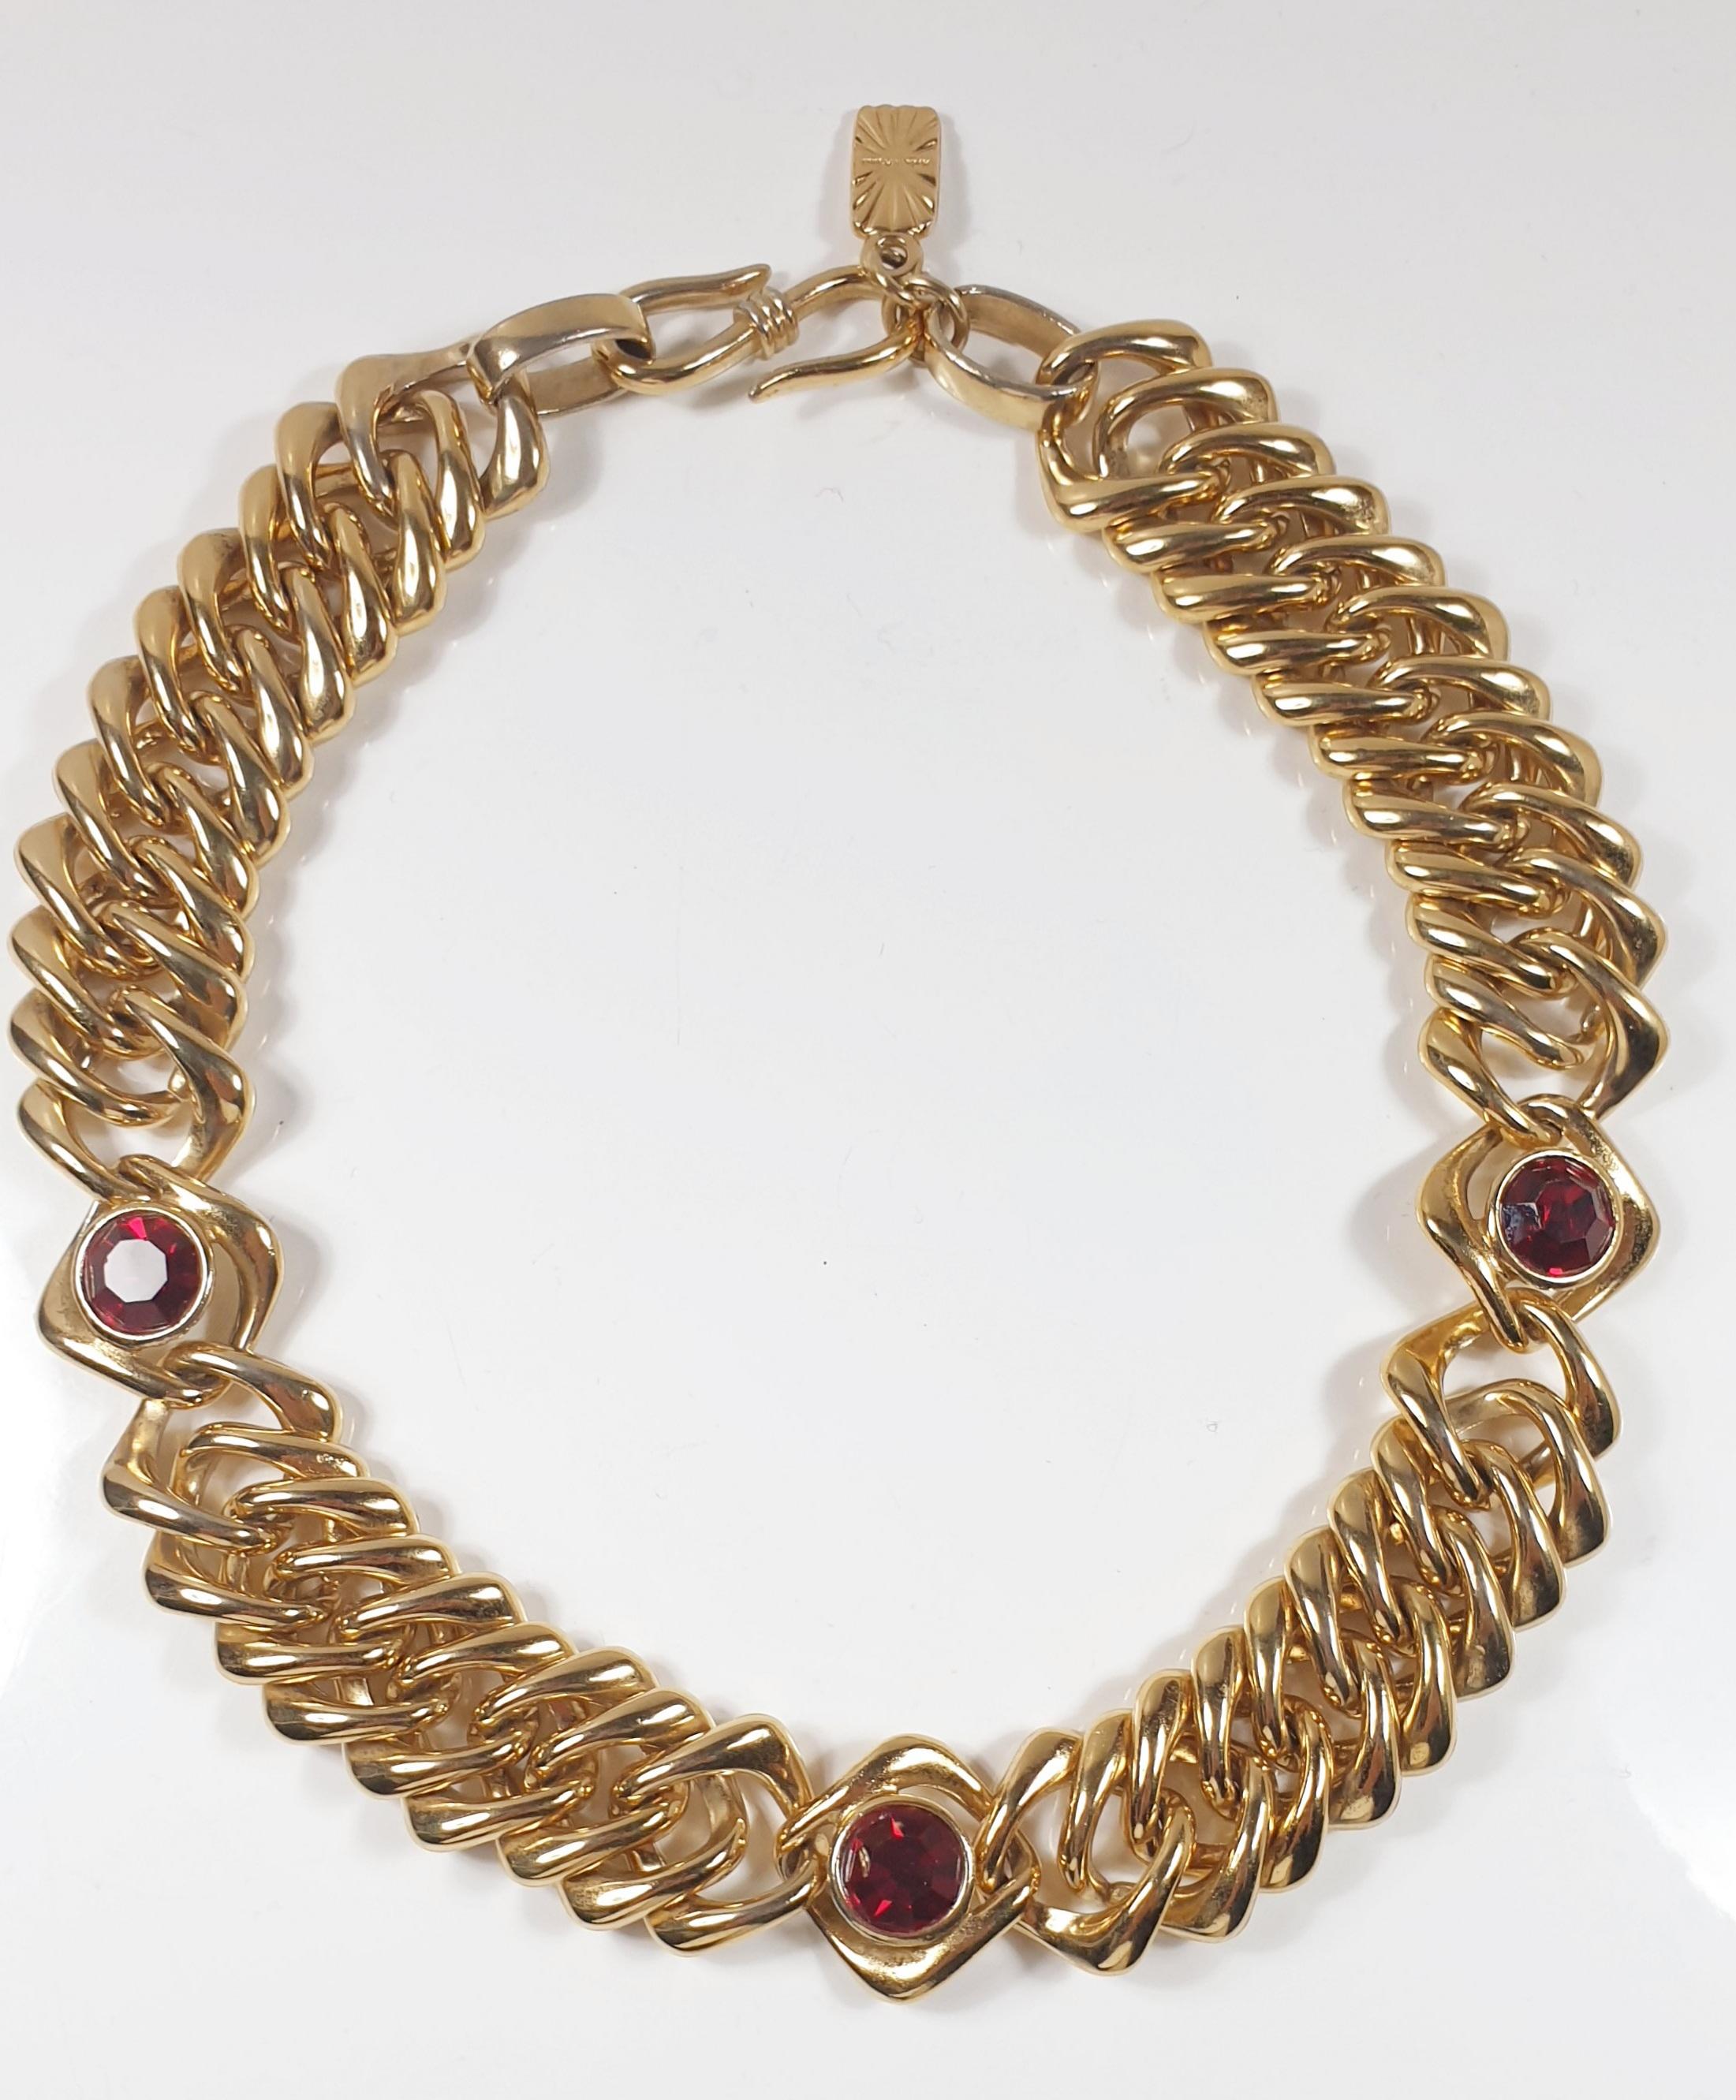 Vintage YSL Yves Saint Laurent Chain Necklace with Gripoix style glass Red  cabochons
This statement 